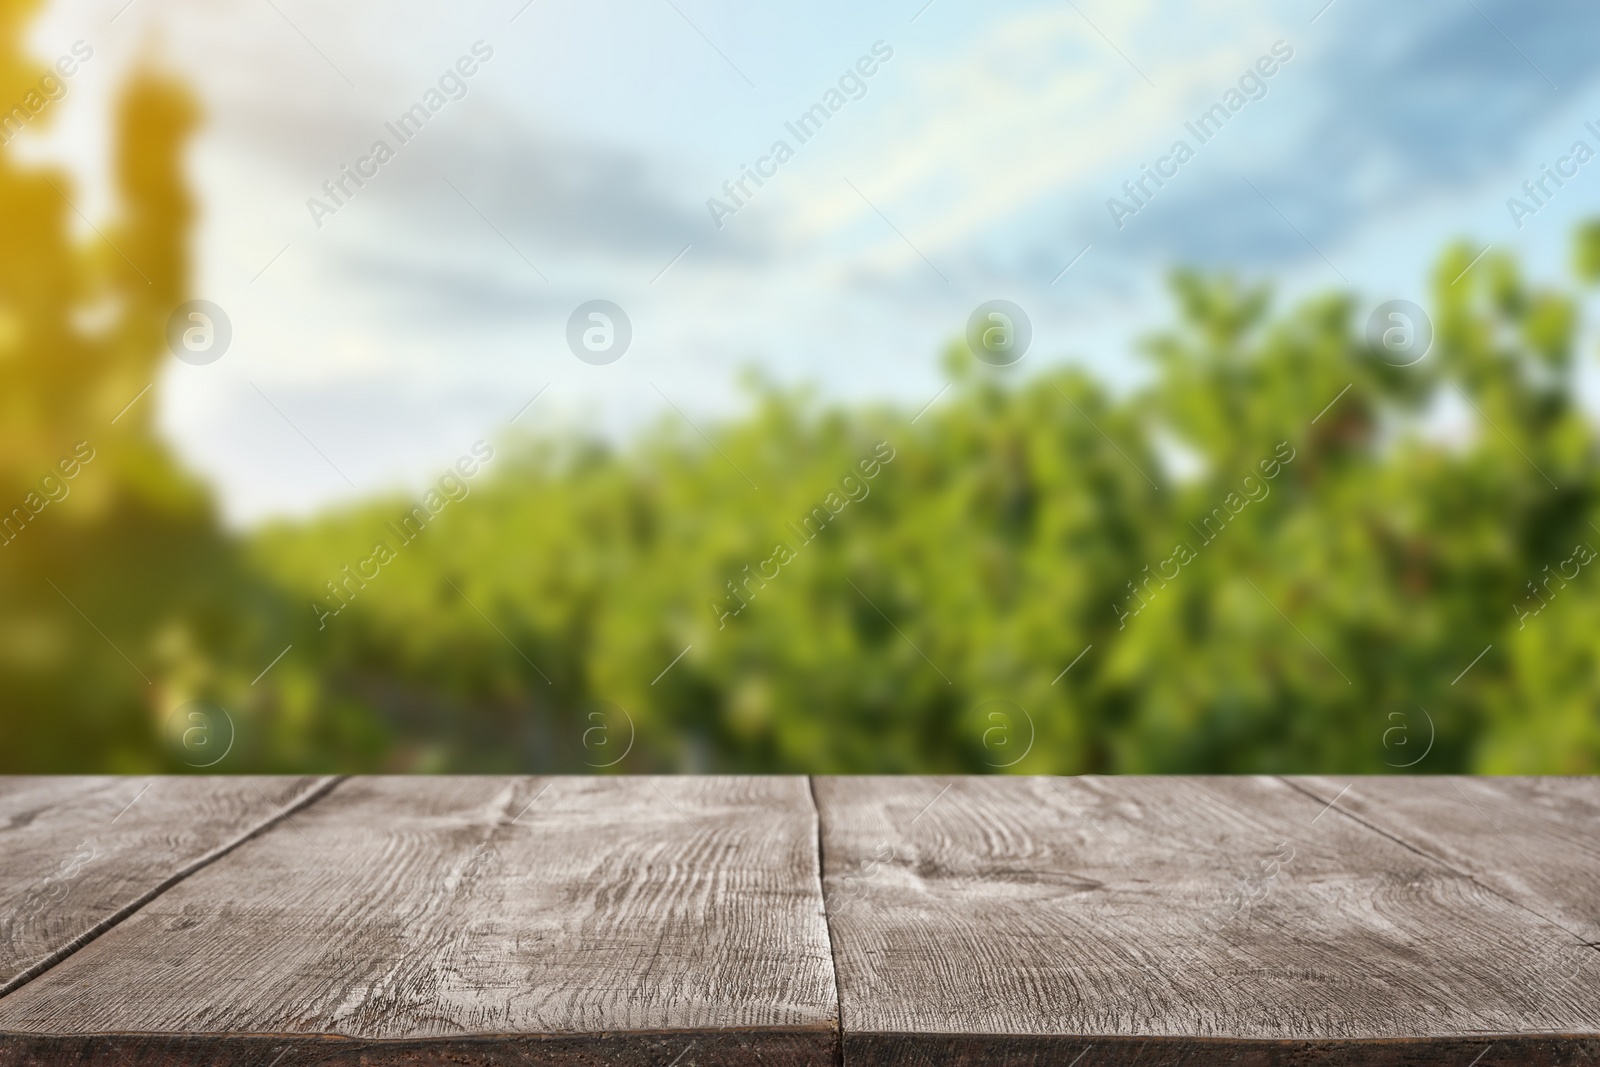 Image of Empty wooden surface and blurred view of vineyard rows with fresh grapes. Space for text